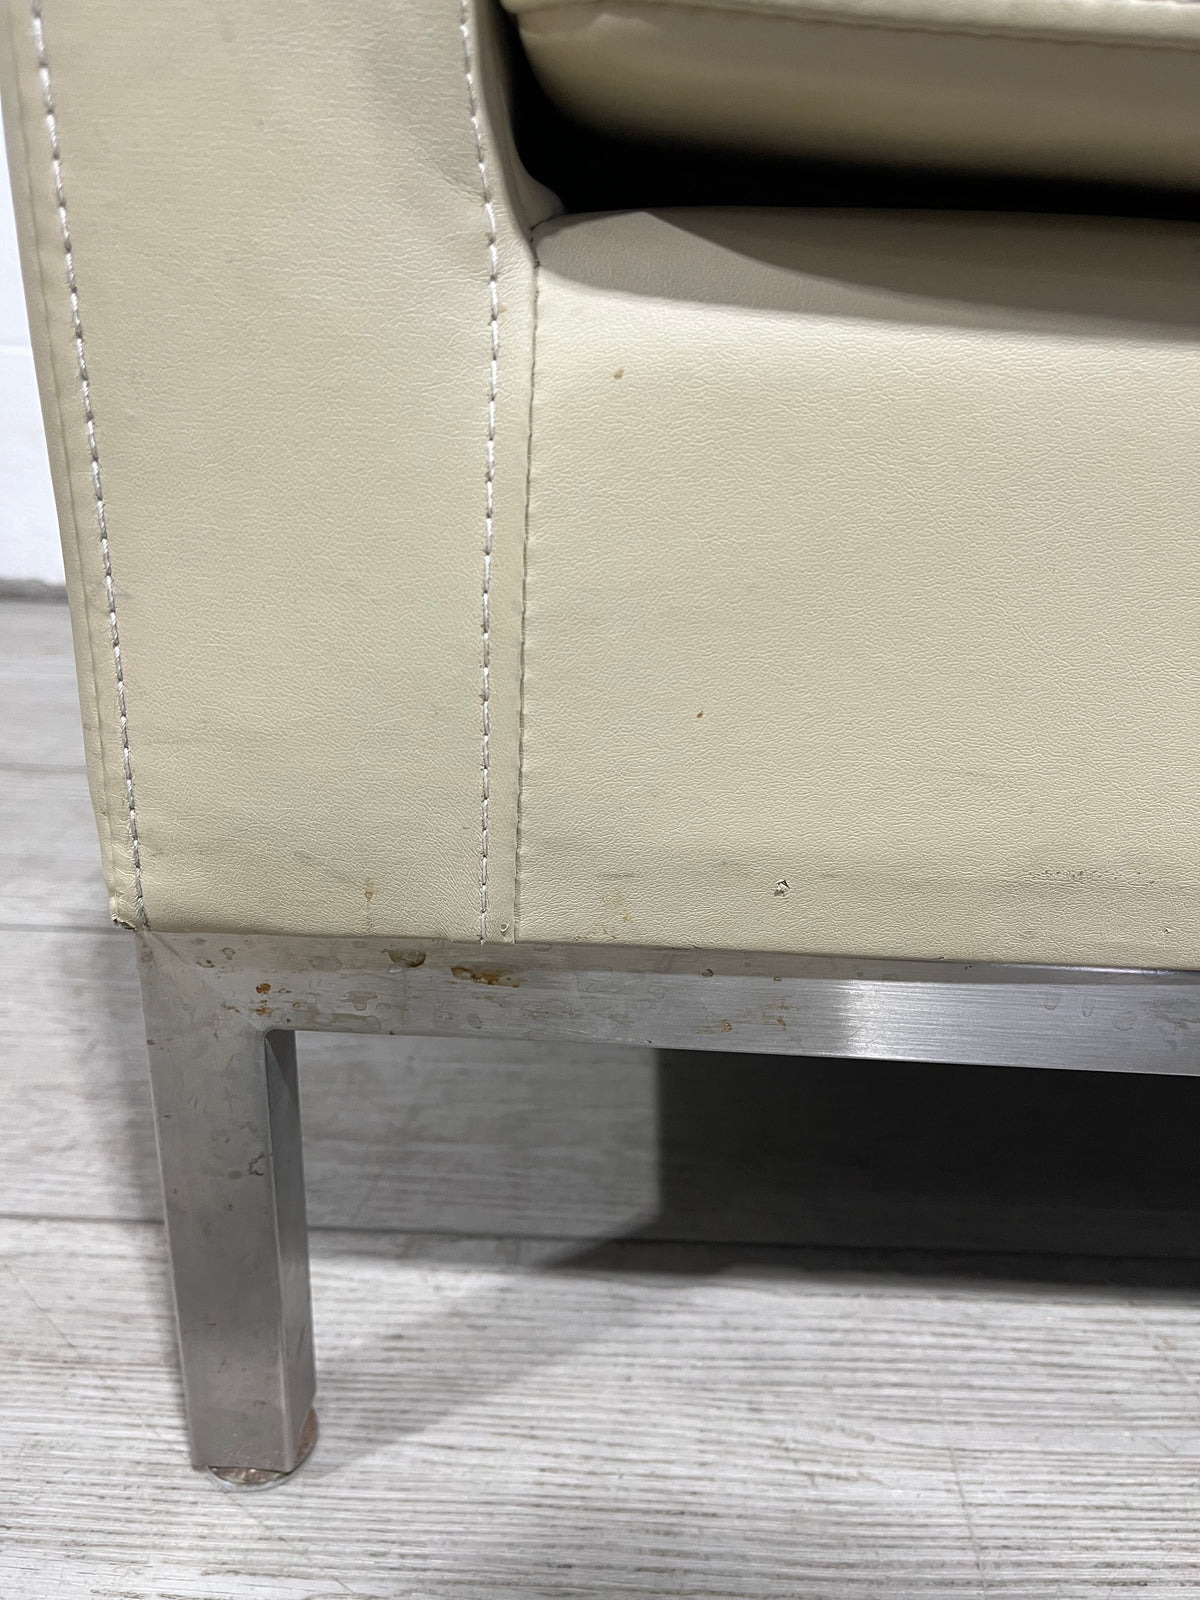 Faux Beige Leather Accent Chair